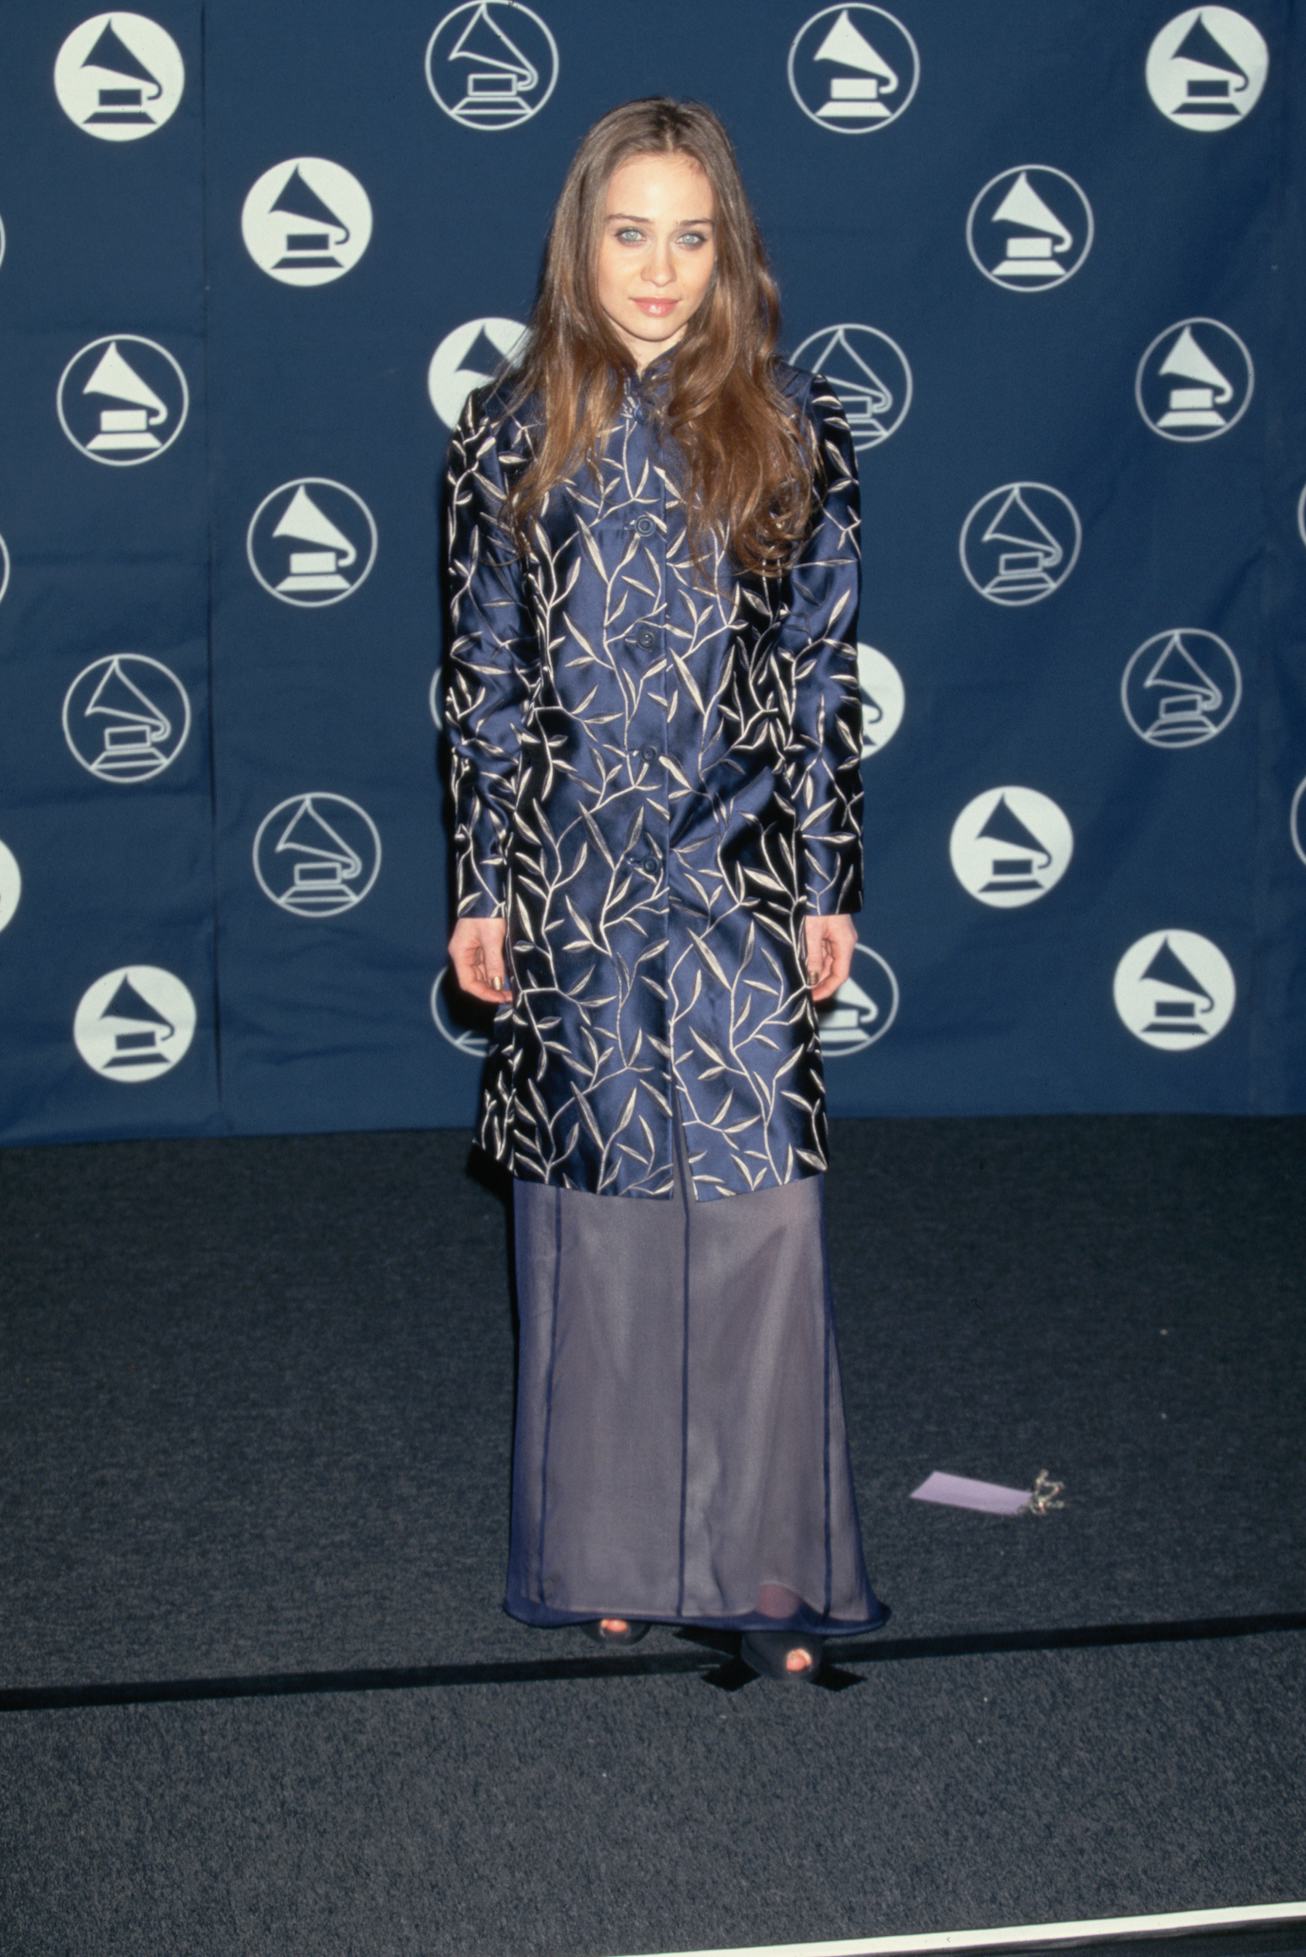 Fiona Apple at the 1997 Grammys.